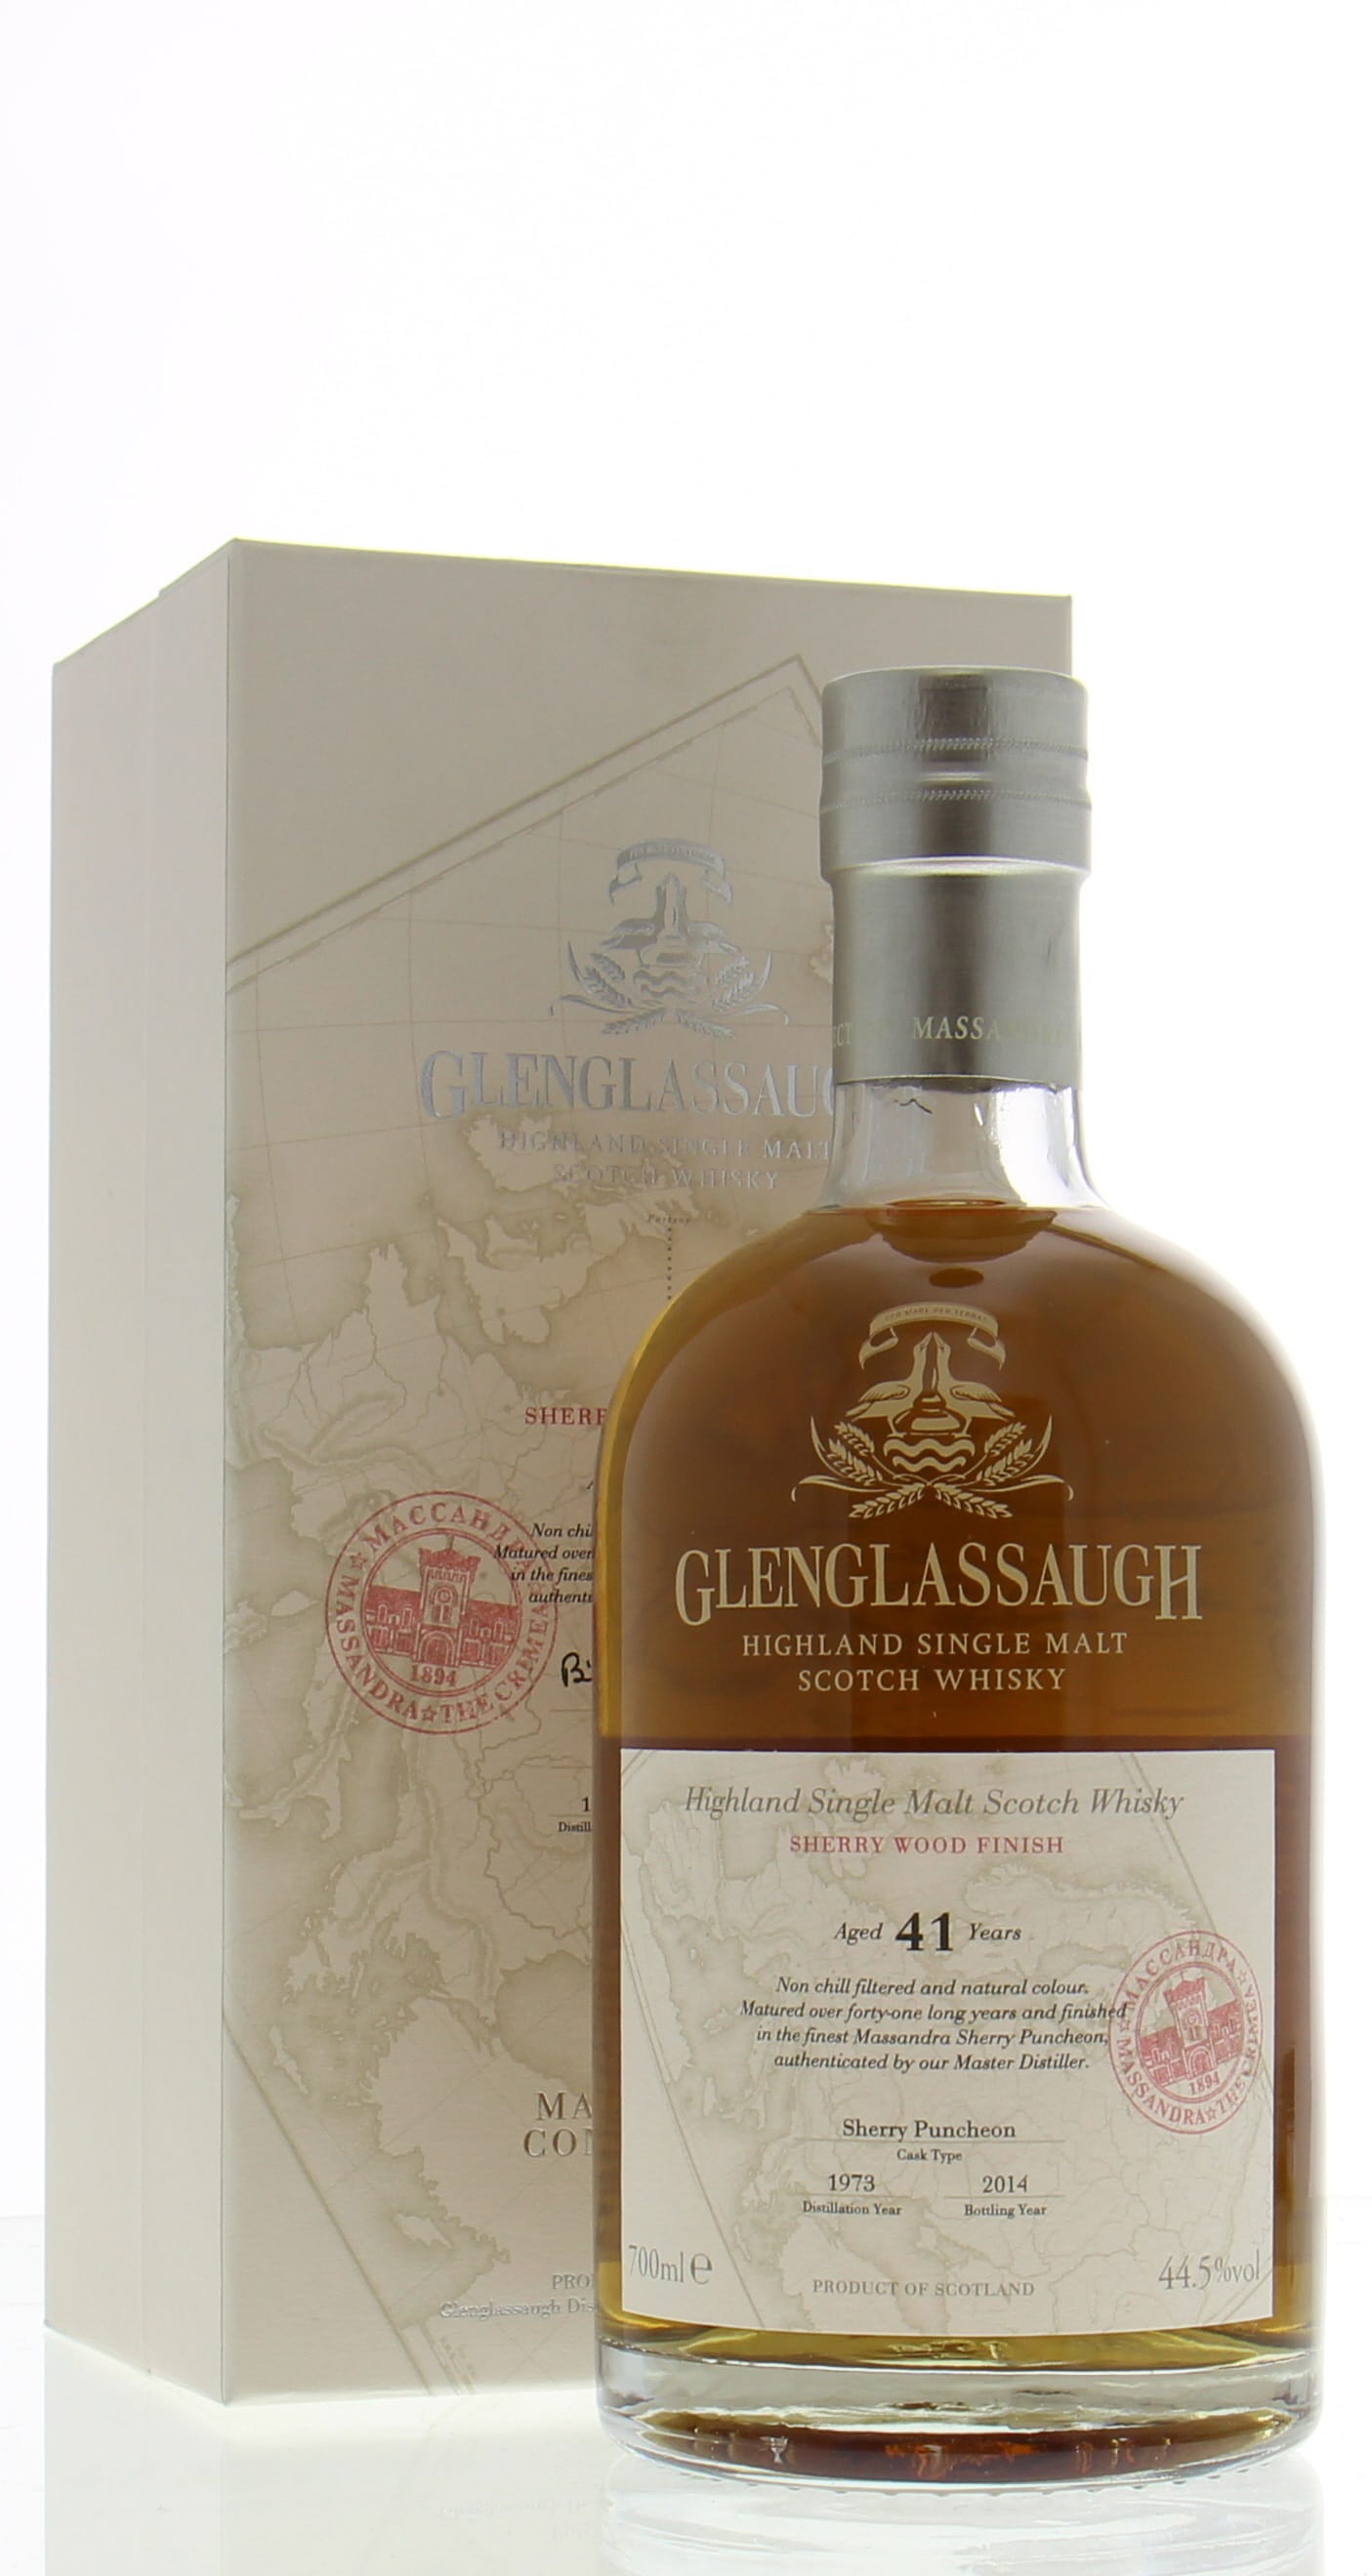 Glenglassaugh - 41 Years Old The Massandra Connection 44.5% 1973 In Original Container